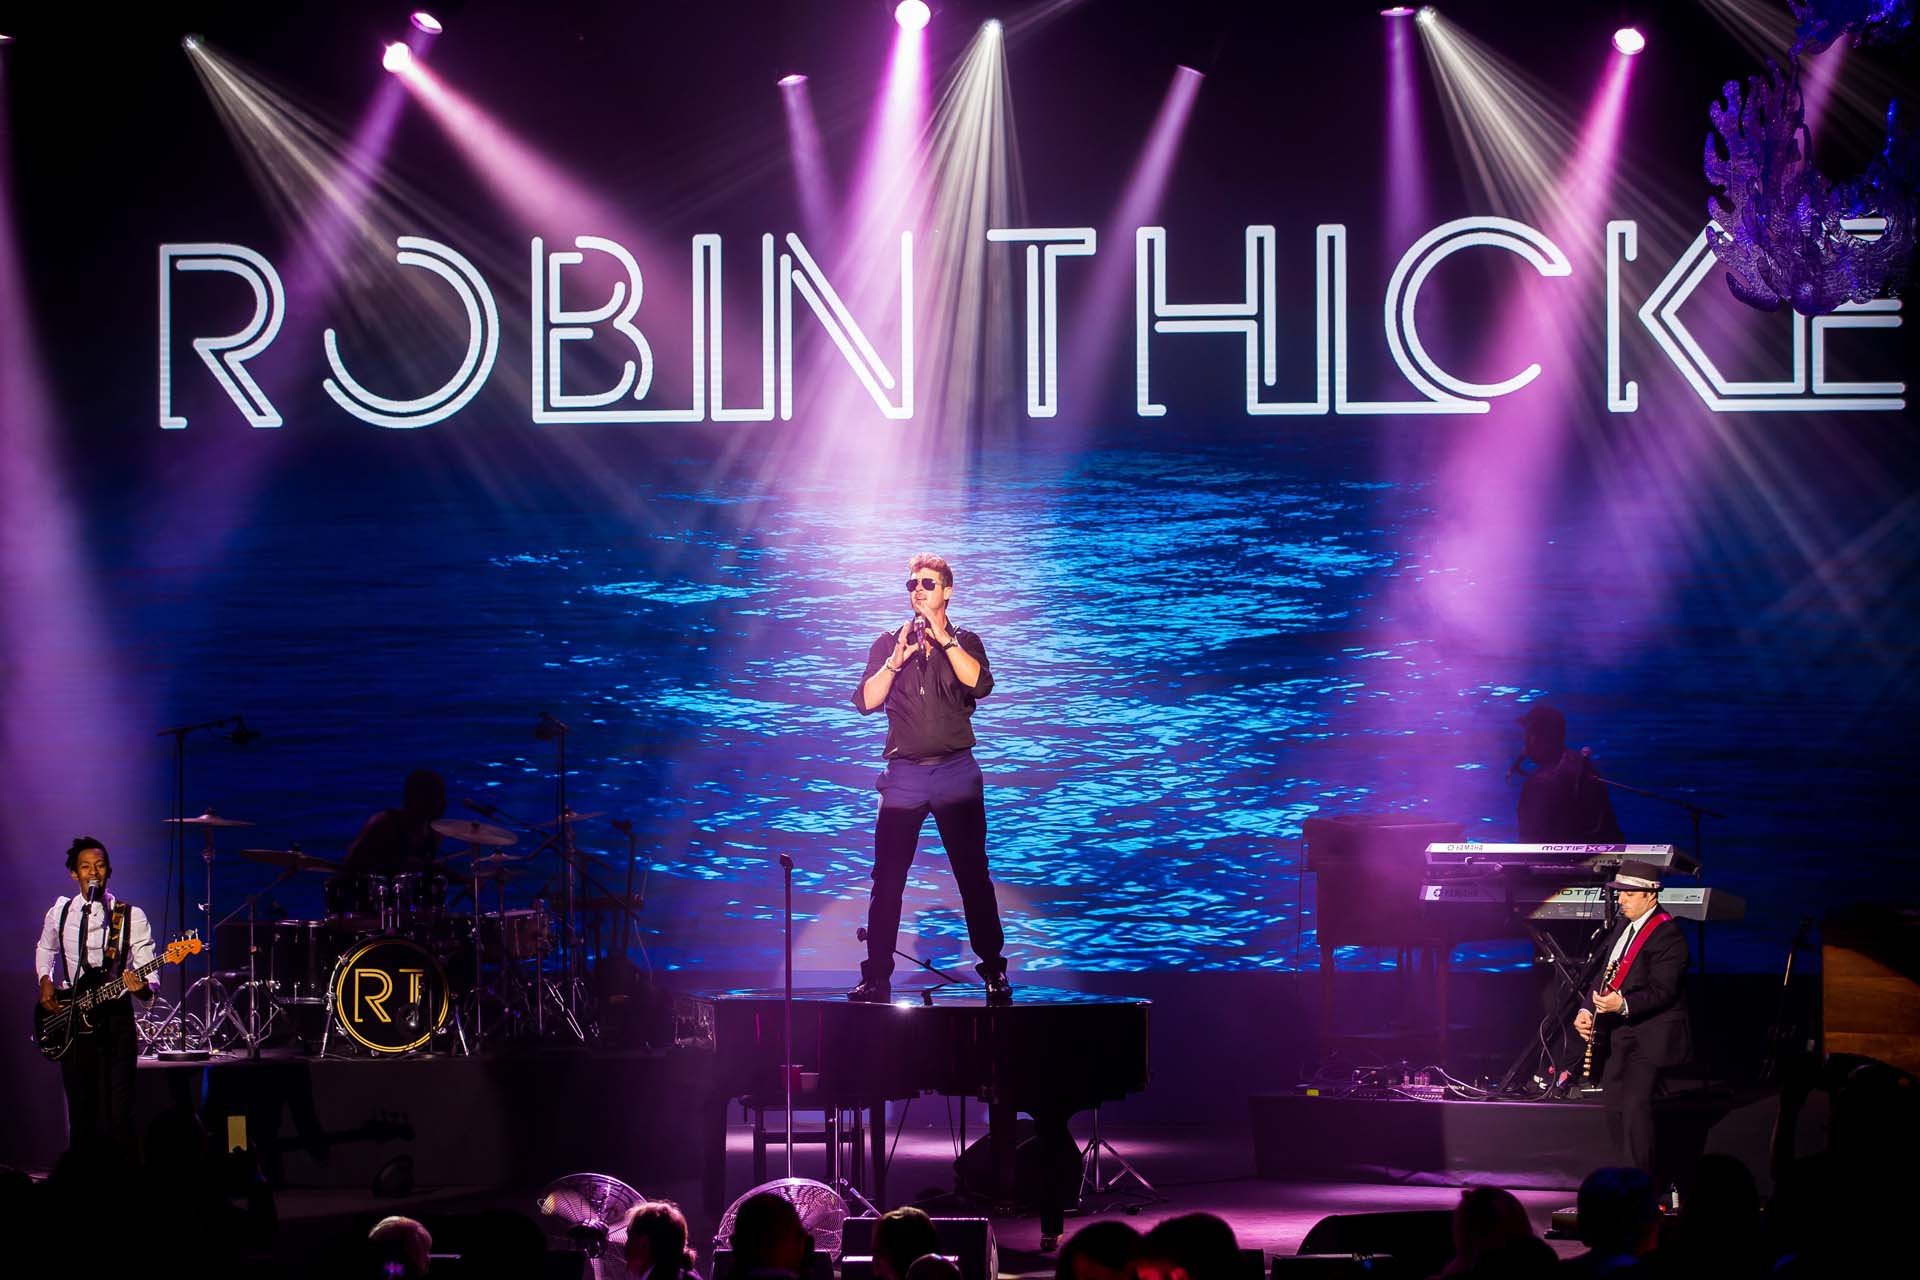 Robin Thicke on stage.